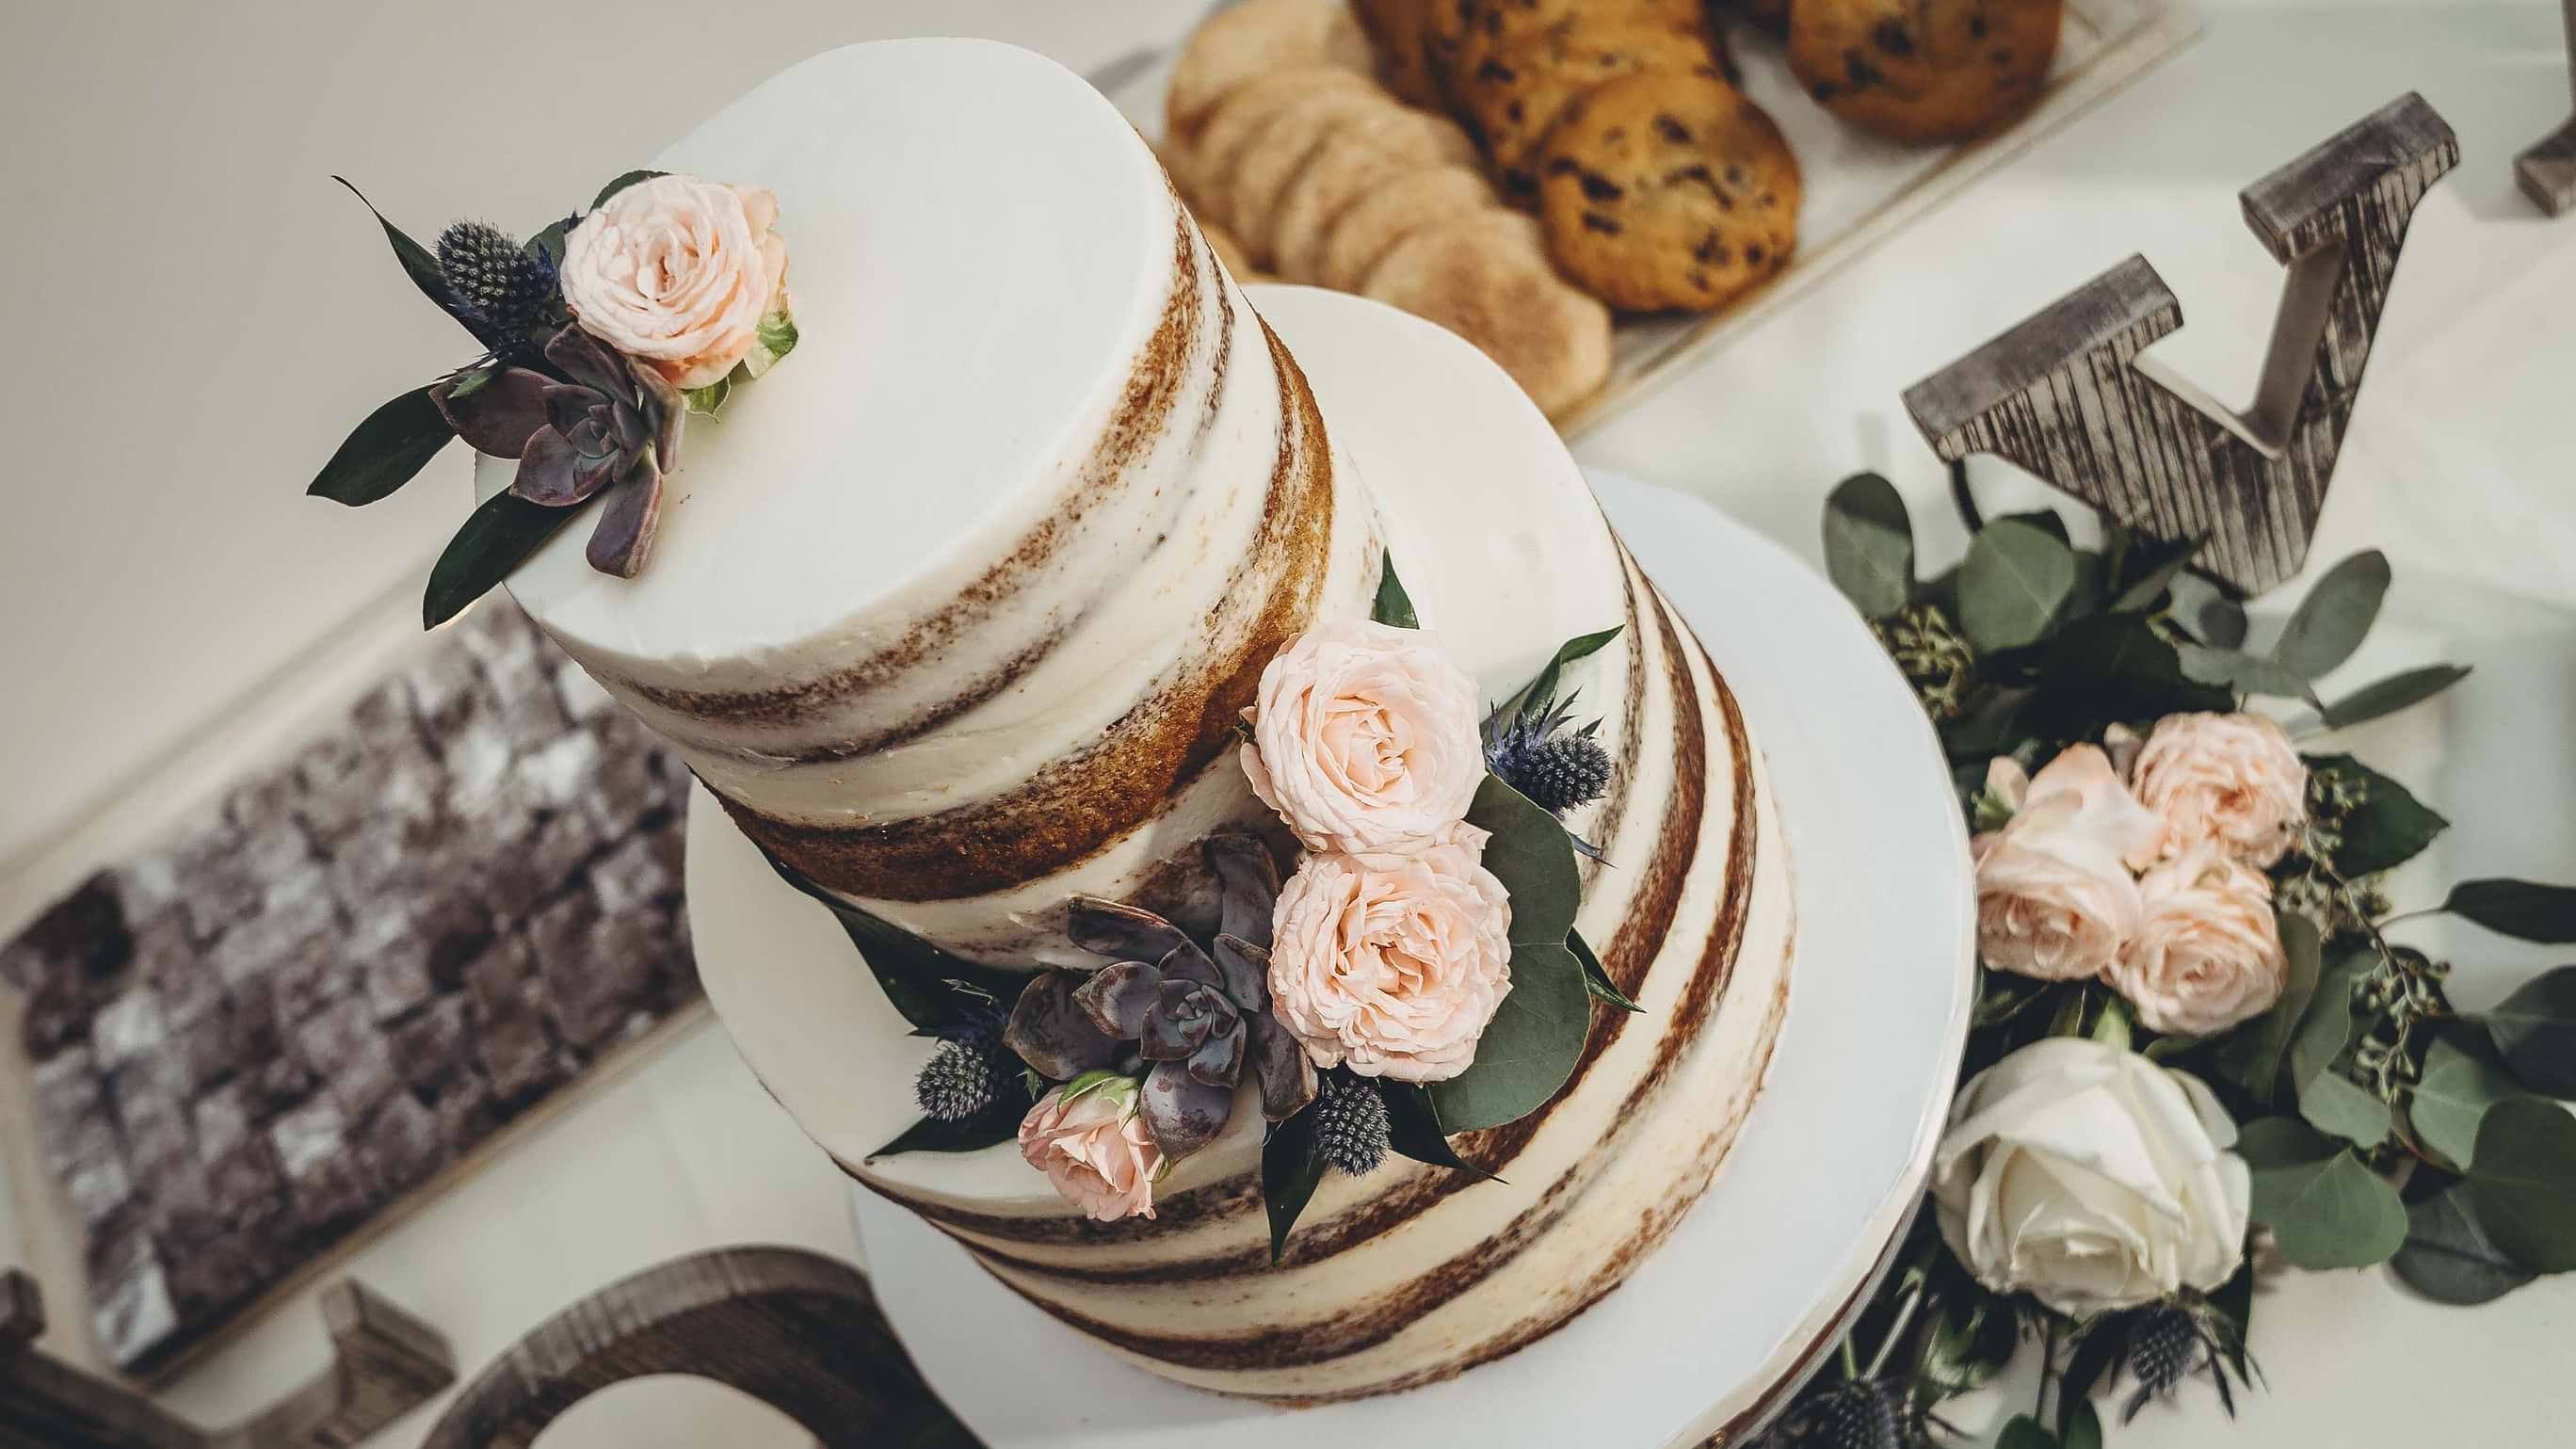 Naked Cakes are on-trend for boho style weddings